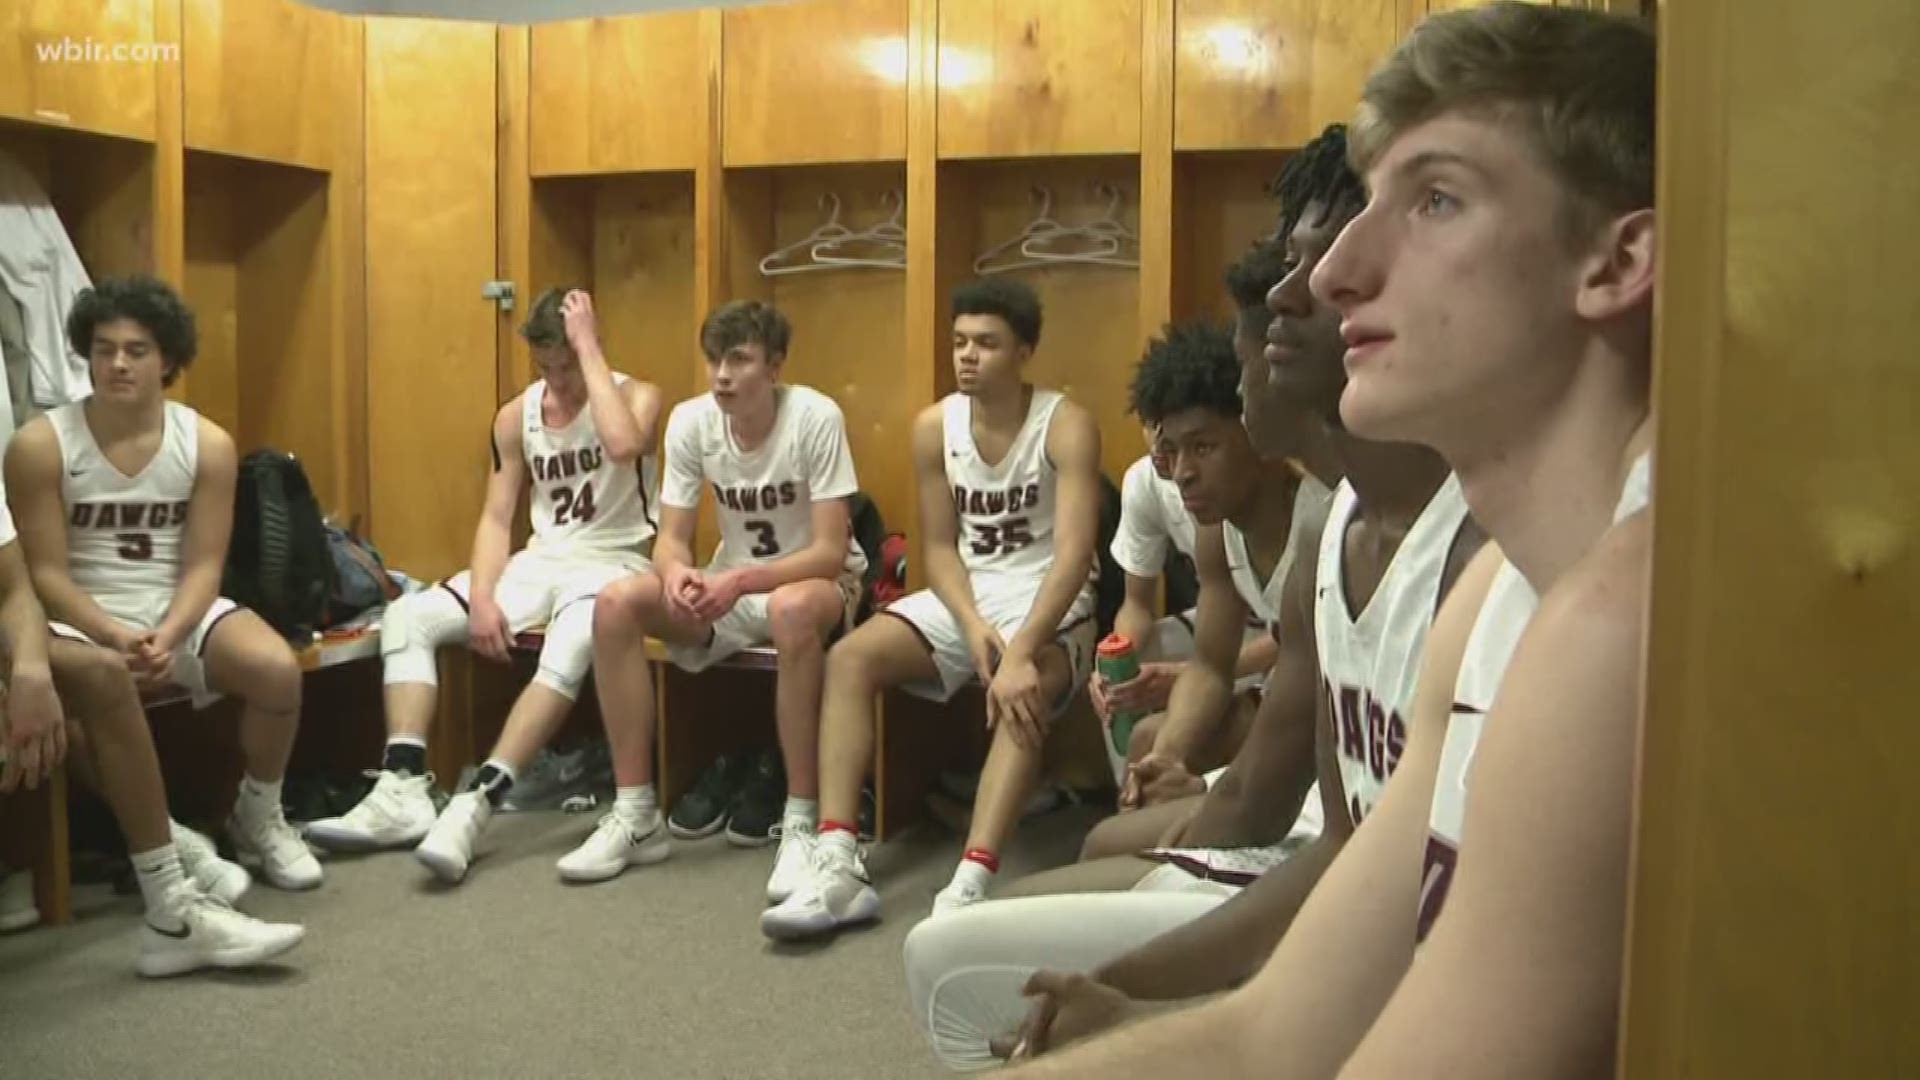 WBIR 10Sports Reporter Luke Slabaugh gives you an inside look at the Bearden basketball team, a tight-knit group with a 23-1 record.